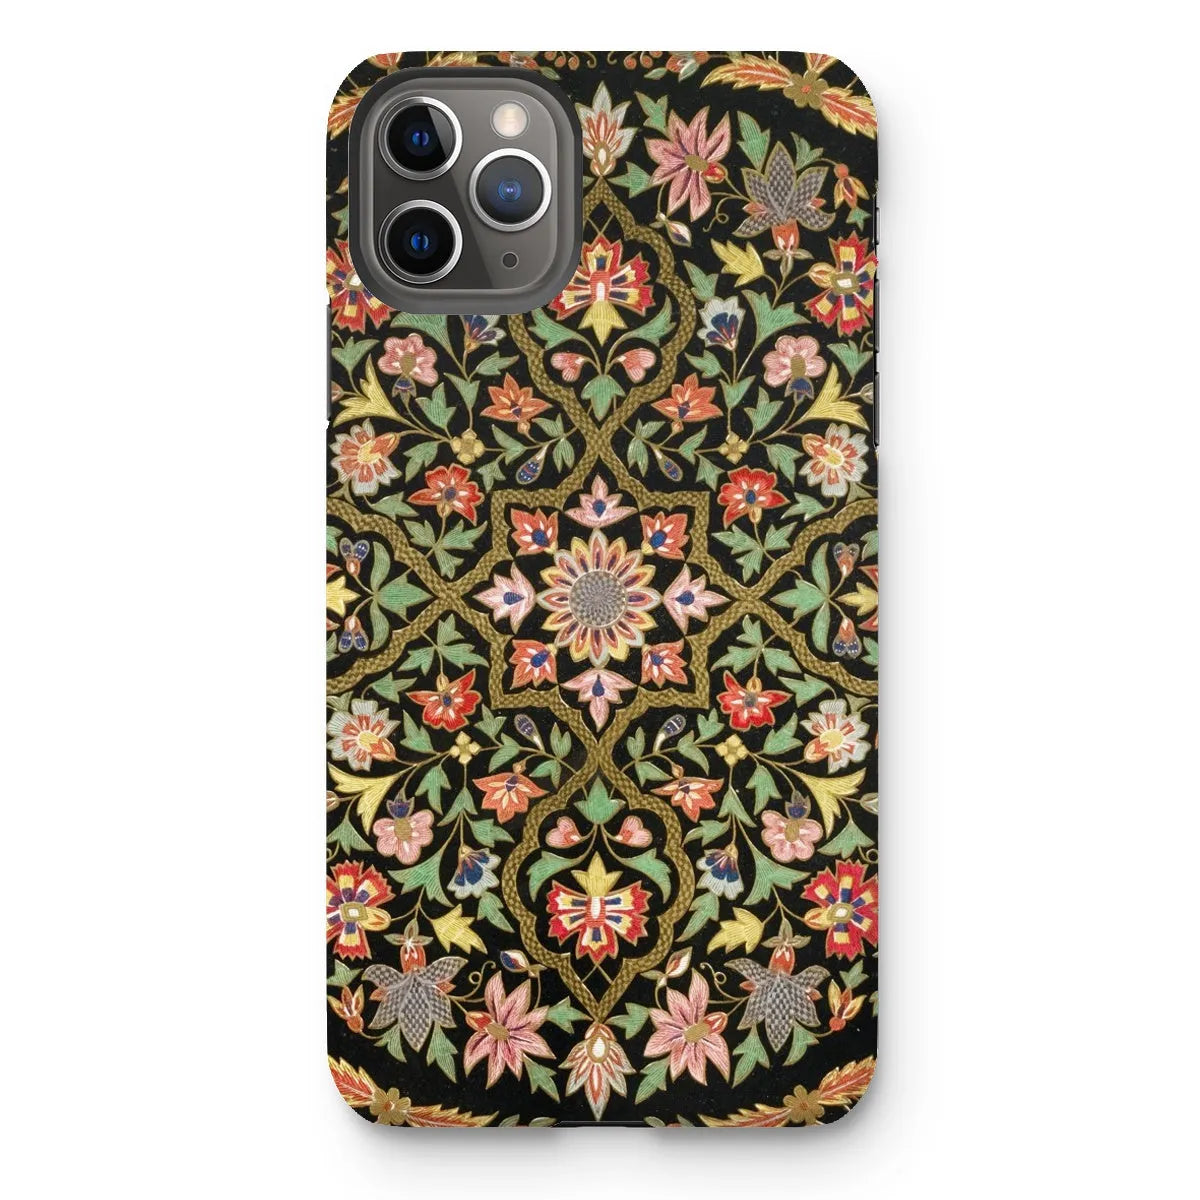 Indian Embroidery - Aesthetic Pattern Art Phone Case - Iphone 11 Pro Max / Matte - Mobile Phone Cases - Aesthetic Art